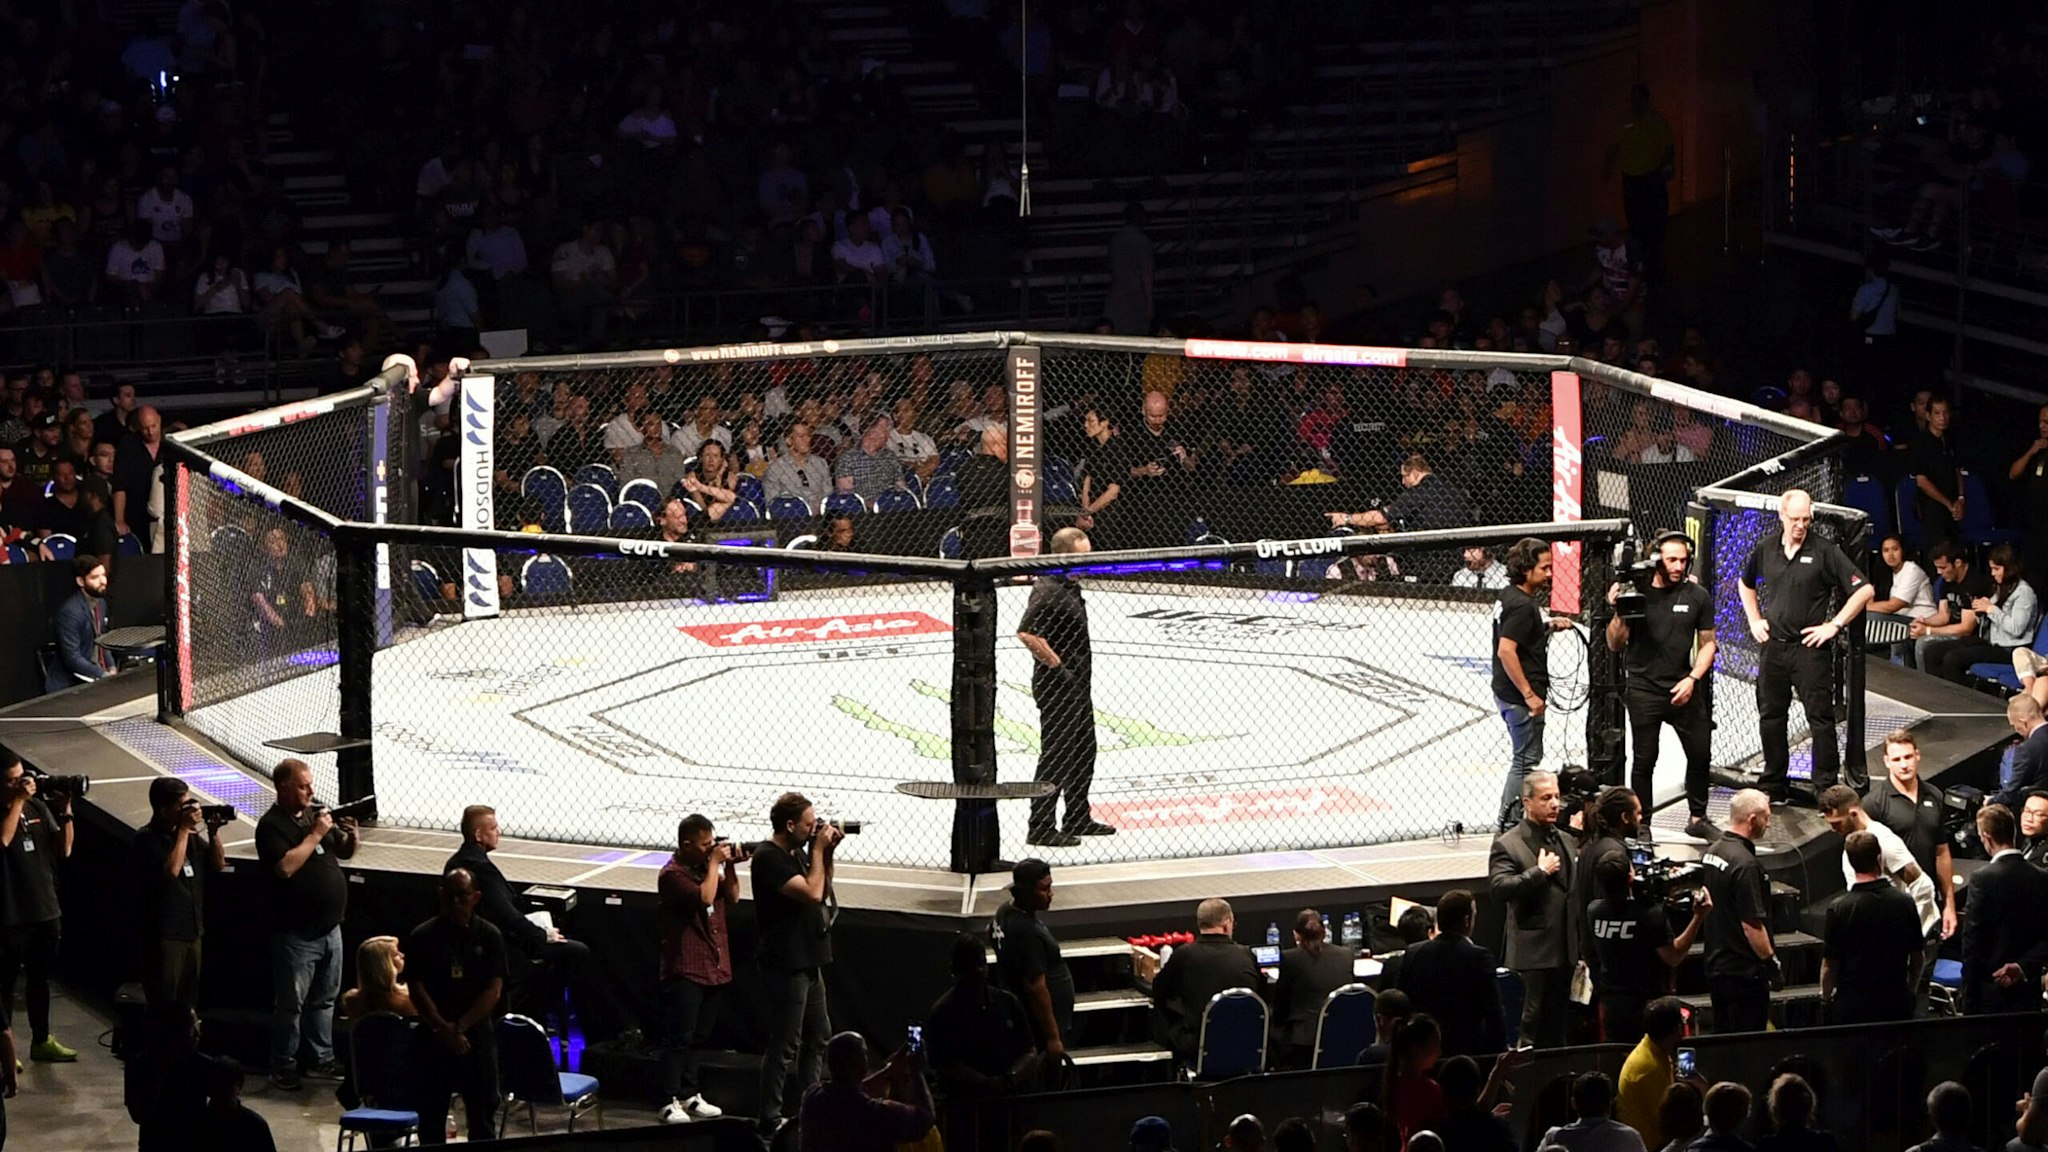 SINGAPORE, SINGAPORE - OCTOBER 26: A general view of the Octagon during the UFC Fight Night event at Singapore Indoor Stadium on October 26, 2019 in Singapore.